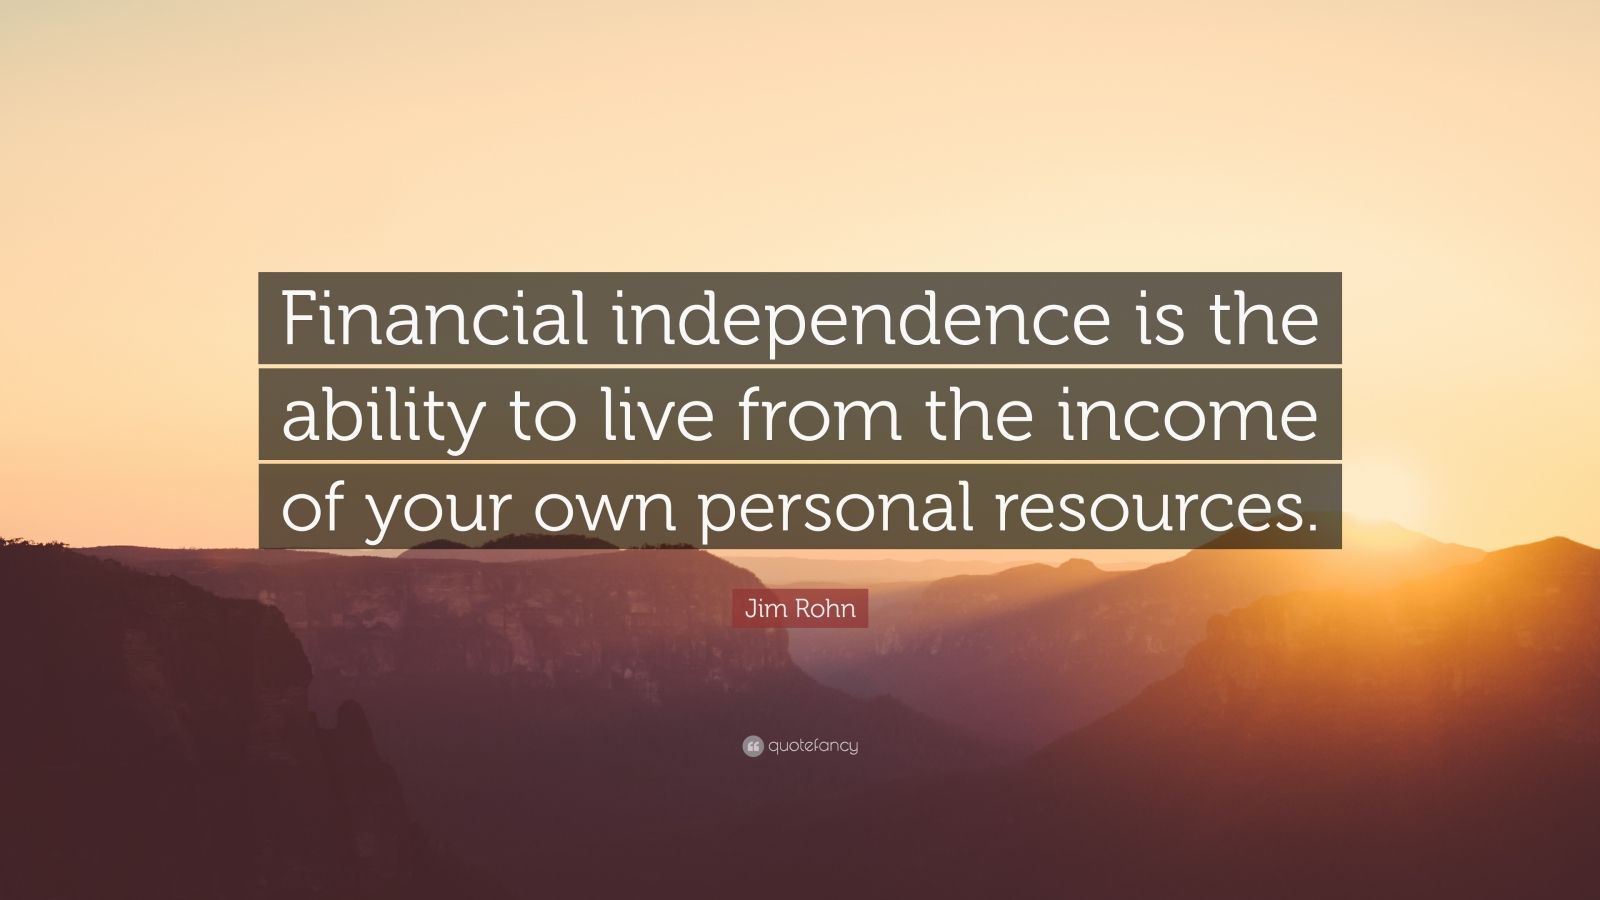 Jim Rohn Quote: “Financial independence is the ability to live from the